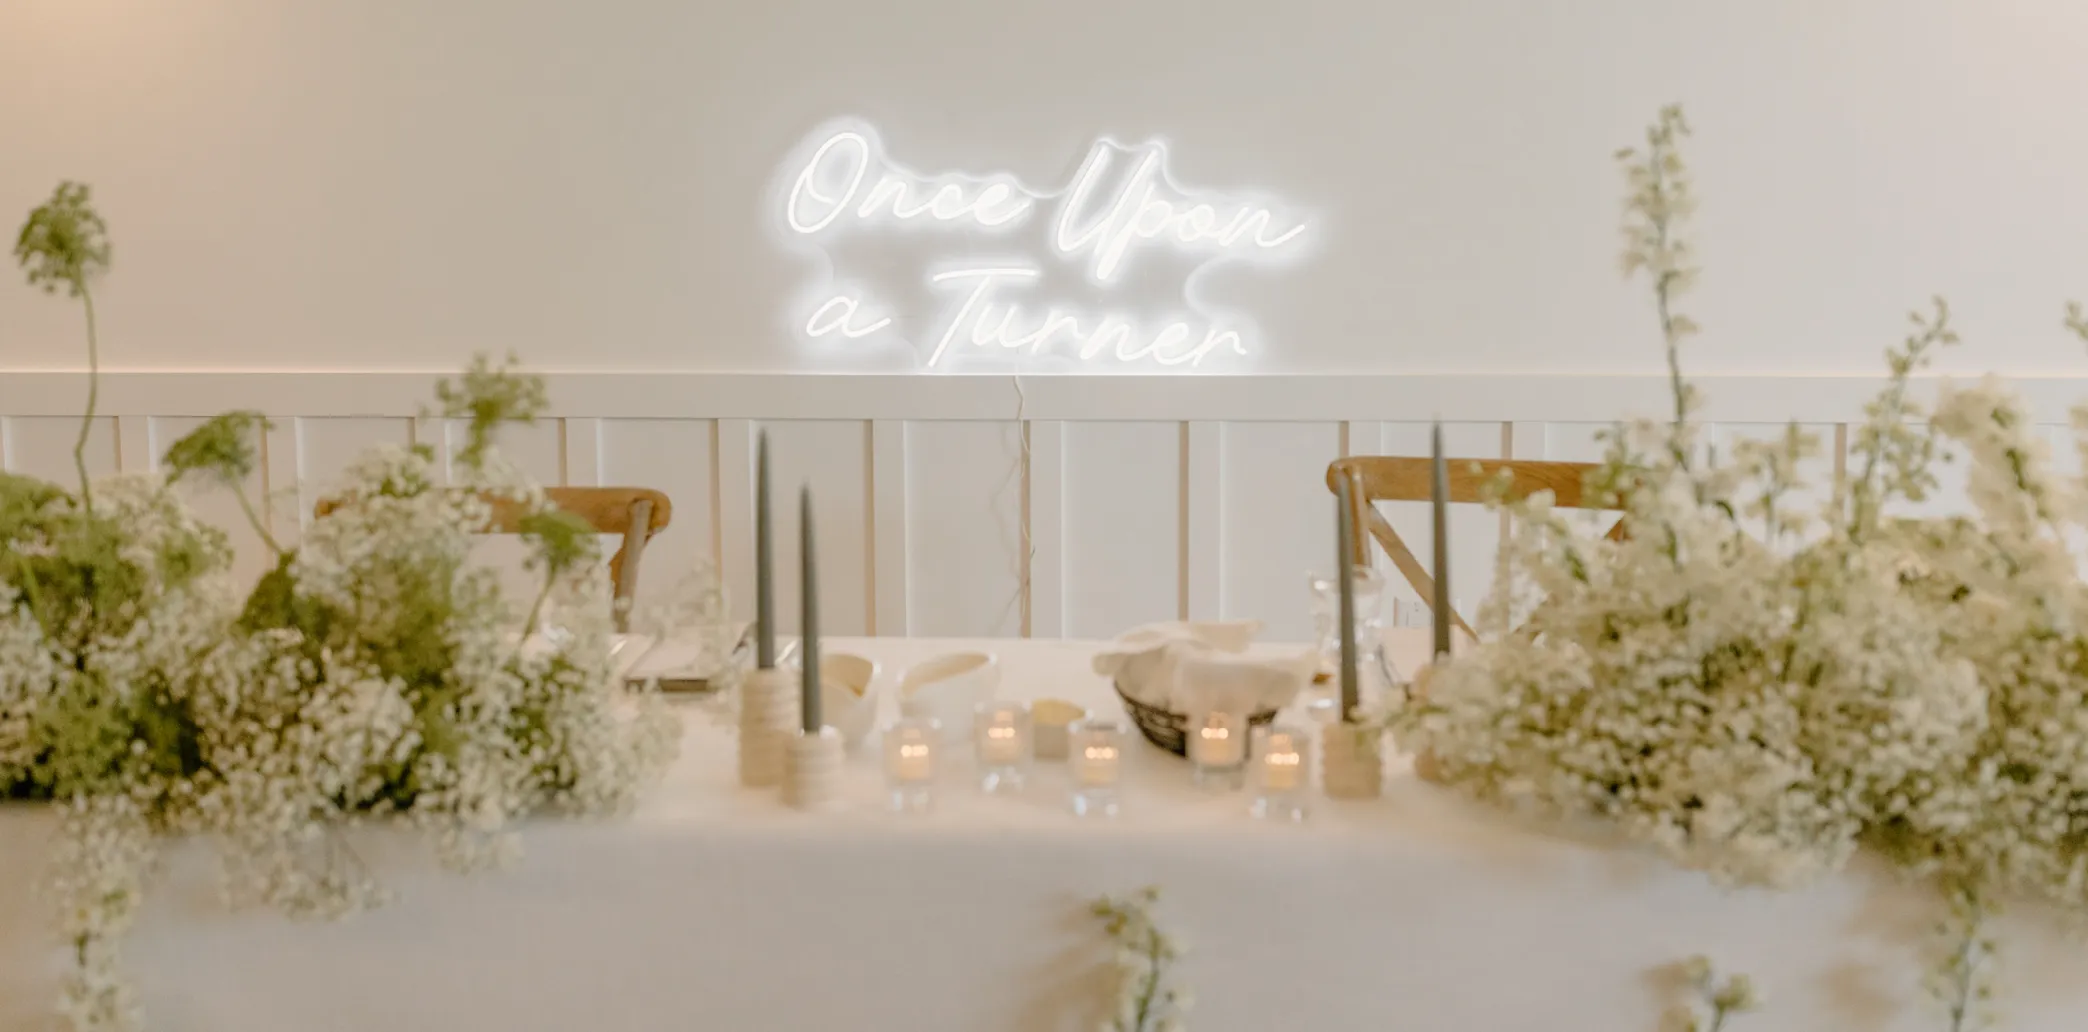 Neon sign above table at wedding that reads Once upon a turner